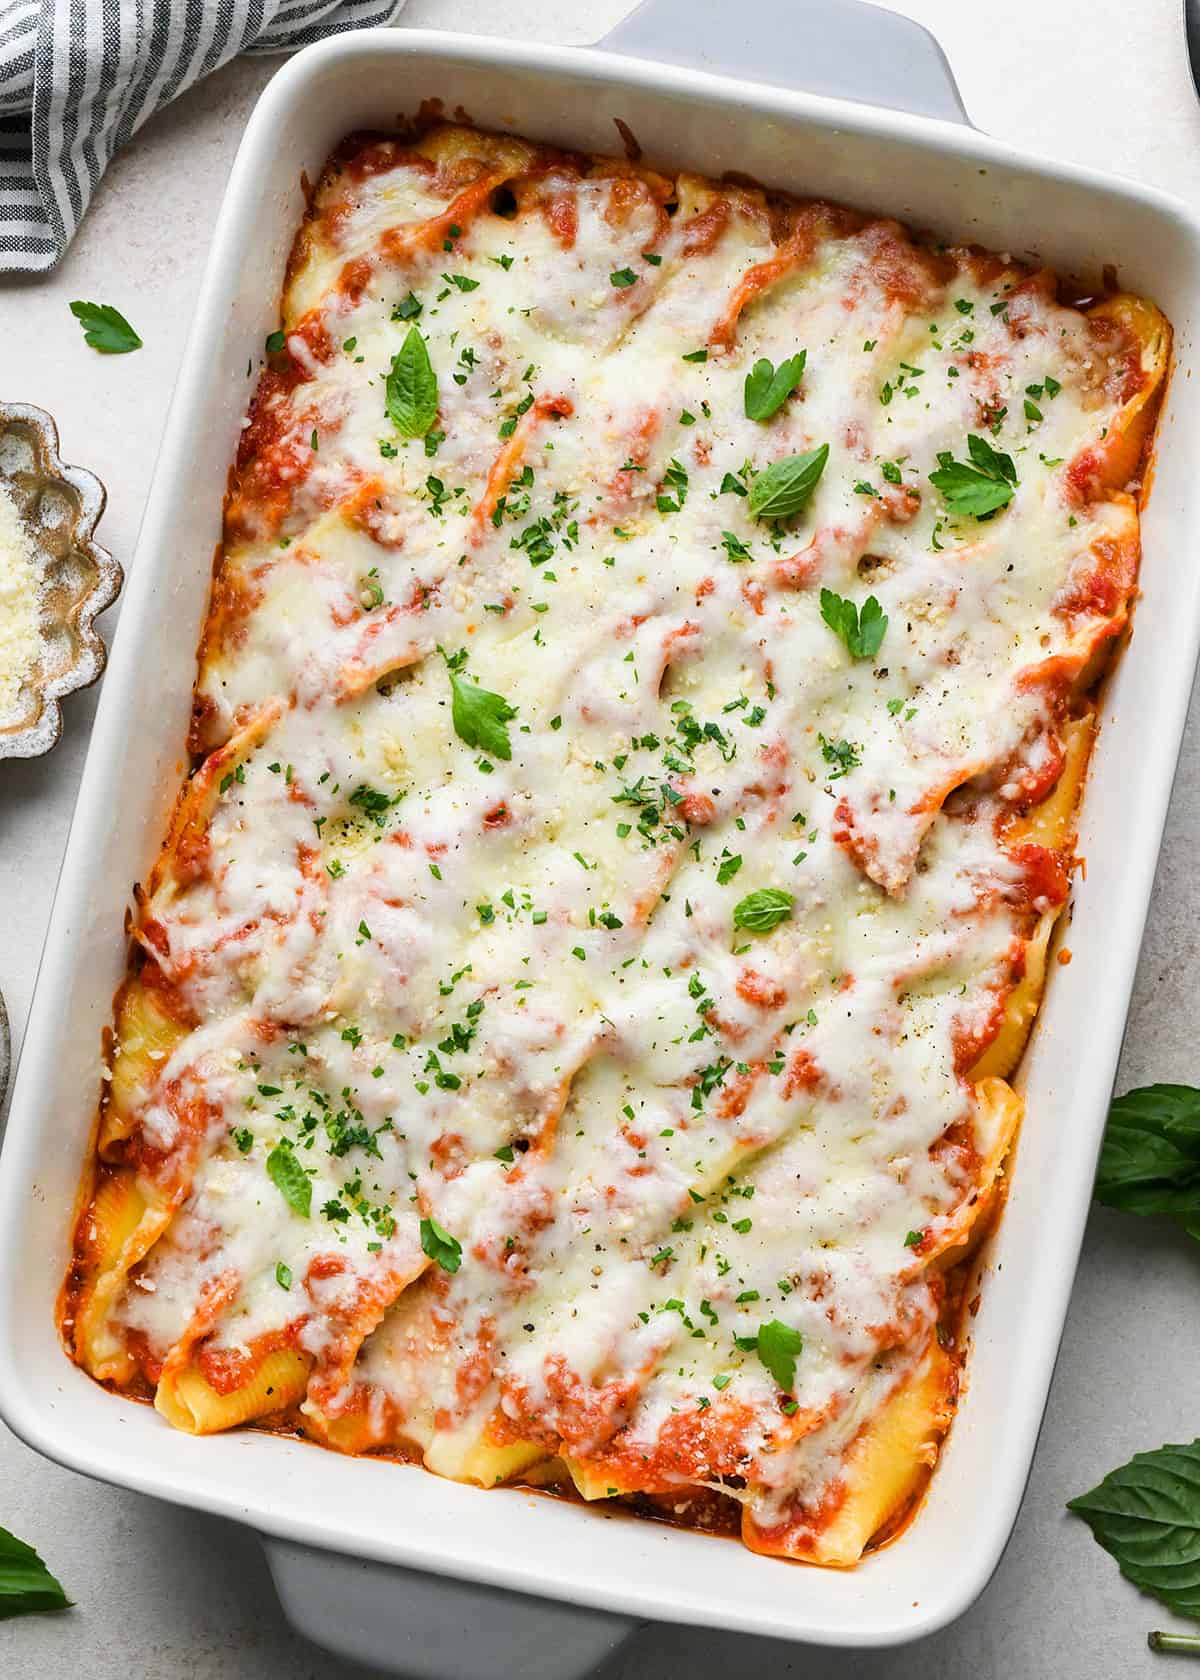 baked Stuffed Shells in a baking dish with parsley